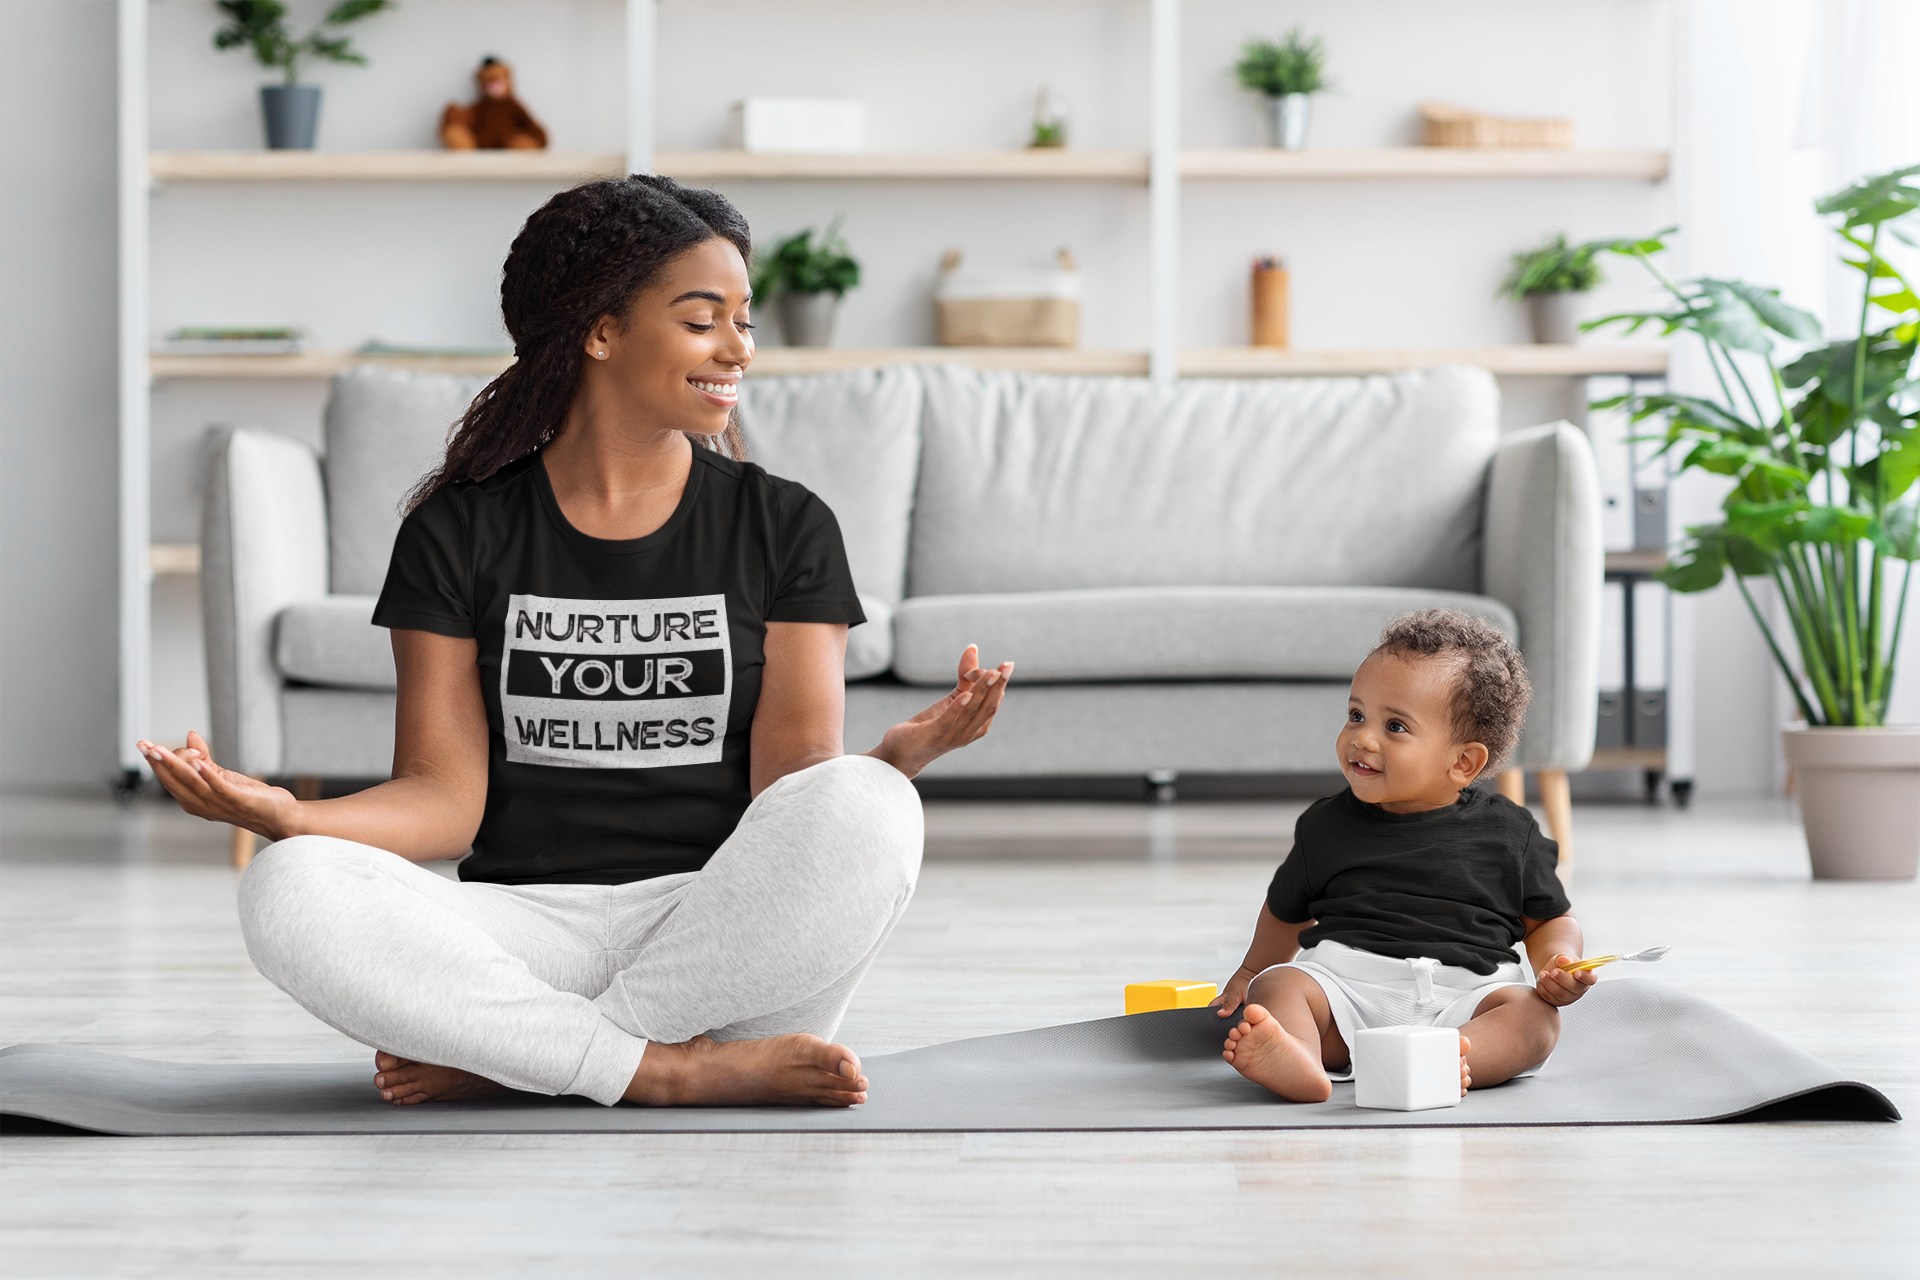 Nurture-Your-Wellnes-Selflove-mockup-of-a-woman-wearing-a-t-shirt-and-meditating-with-her-baby-at-home-m21564-r-el2.png